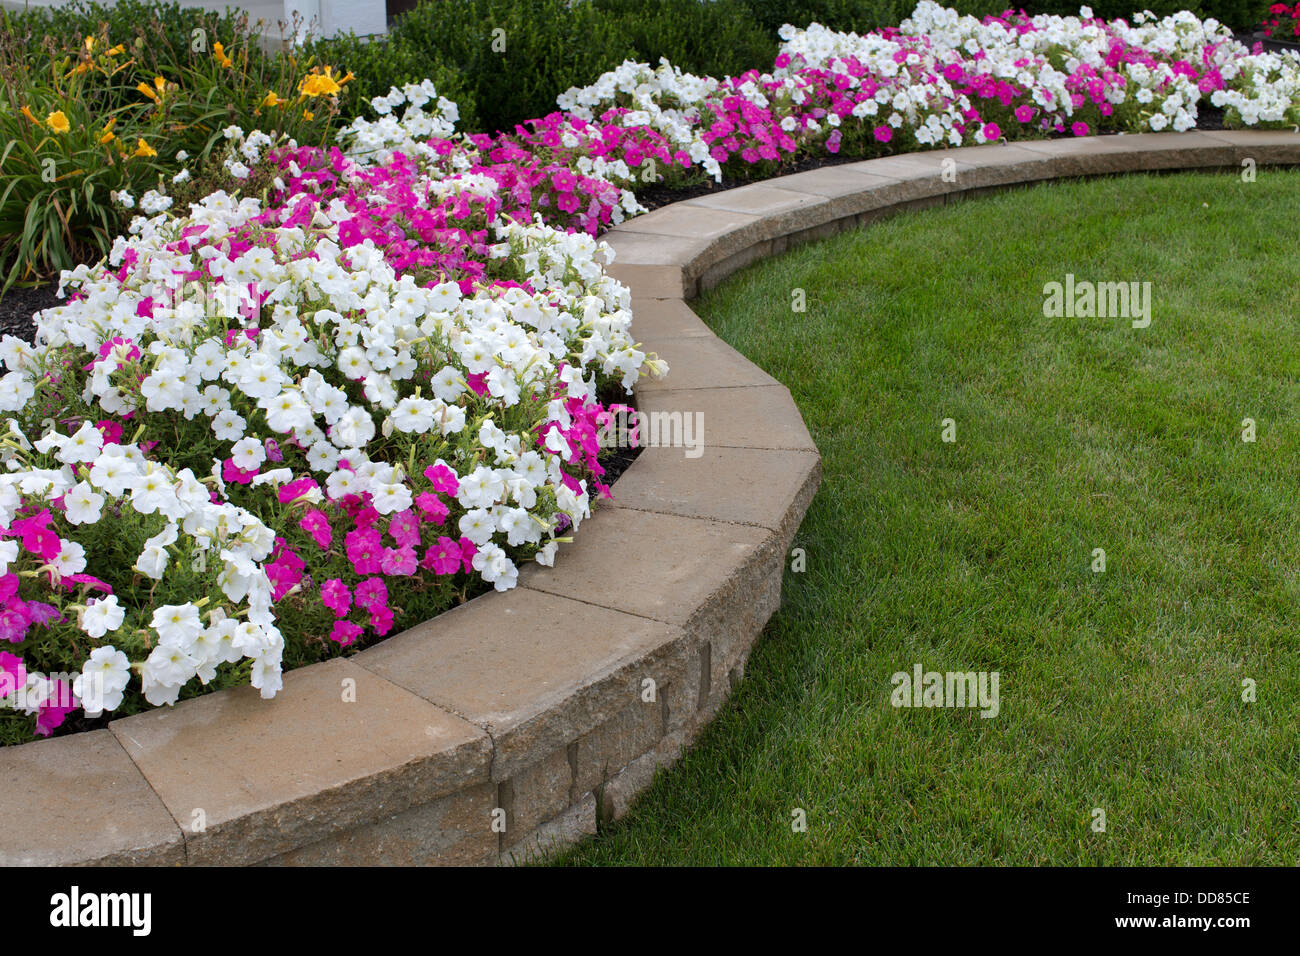 Pink and White petunias on the flower bed along with the grass Stock Photo